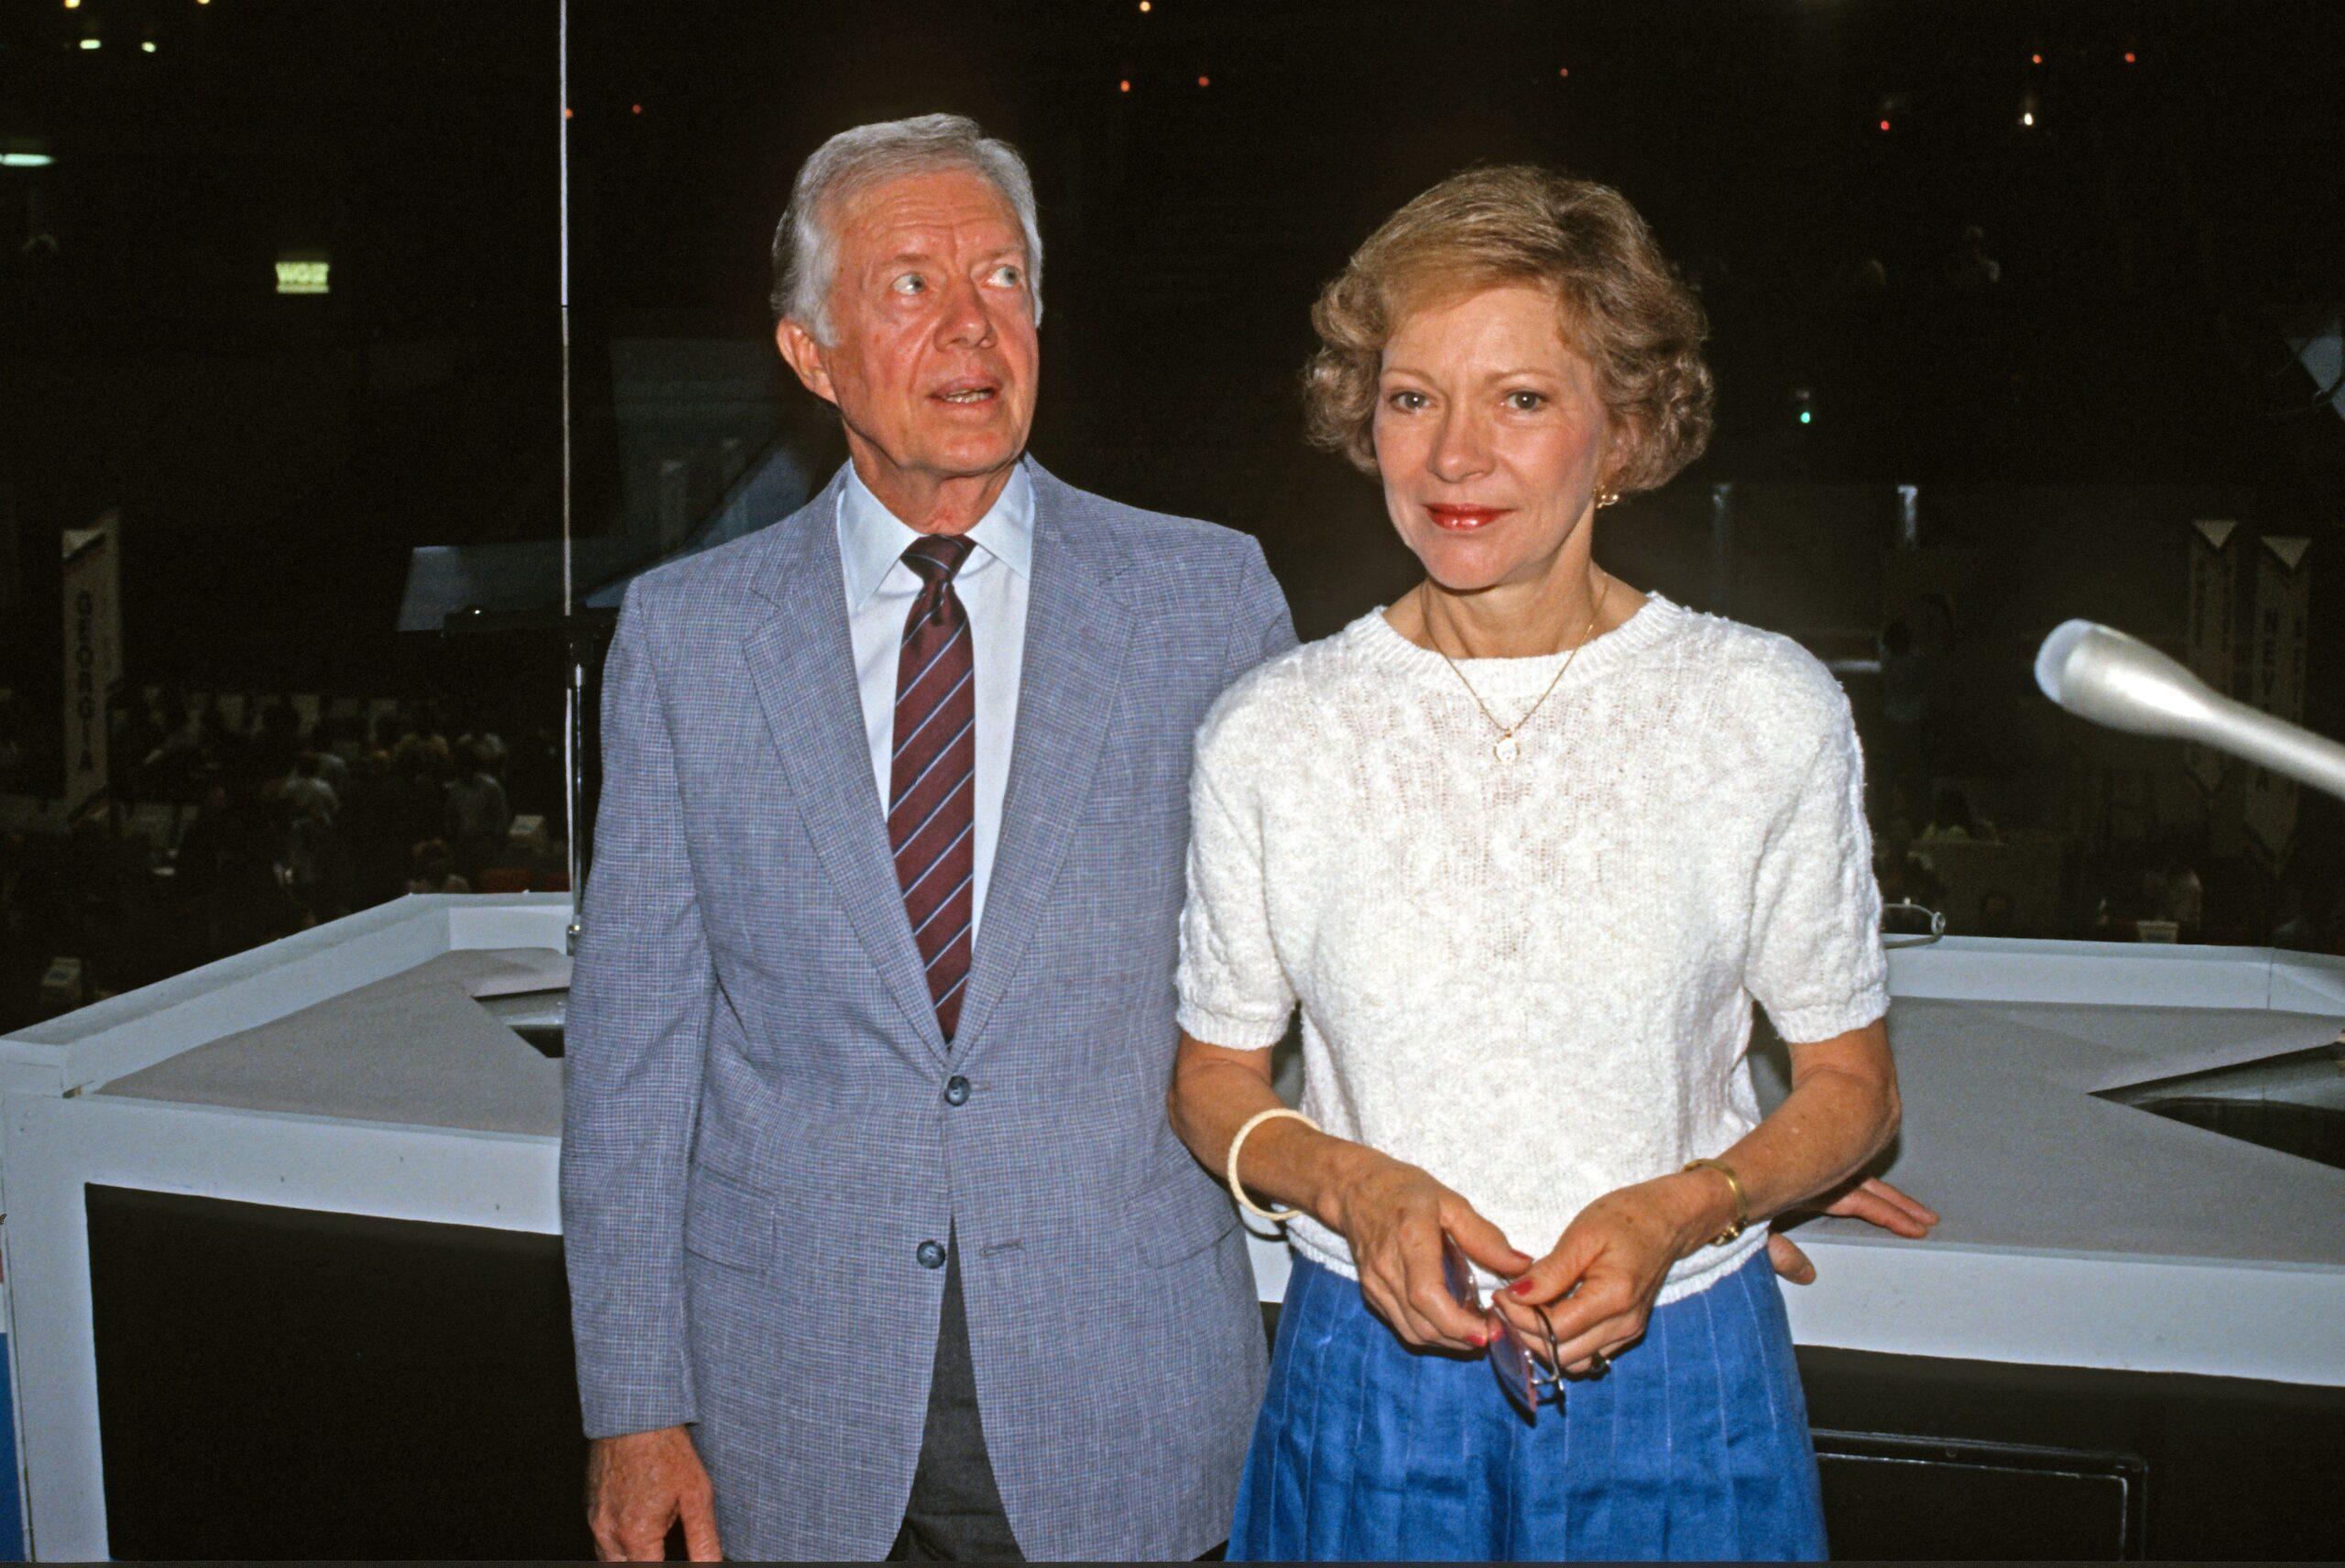 Sad News Of Jimmy Carter's 'Final Chapter' Triggering Long-Time Admirers